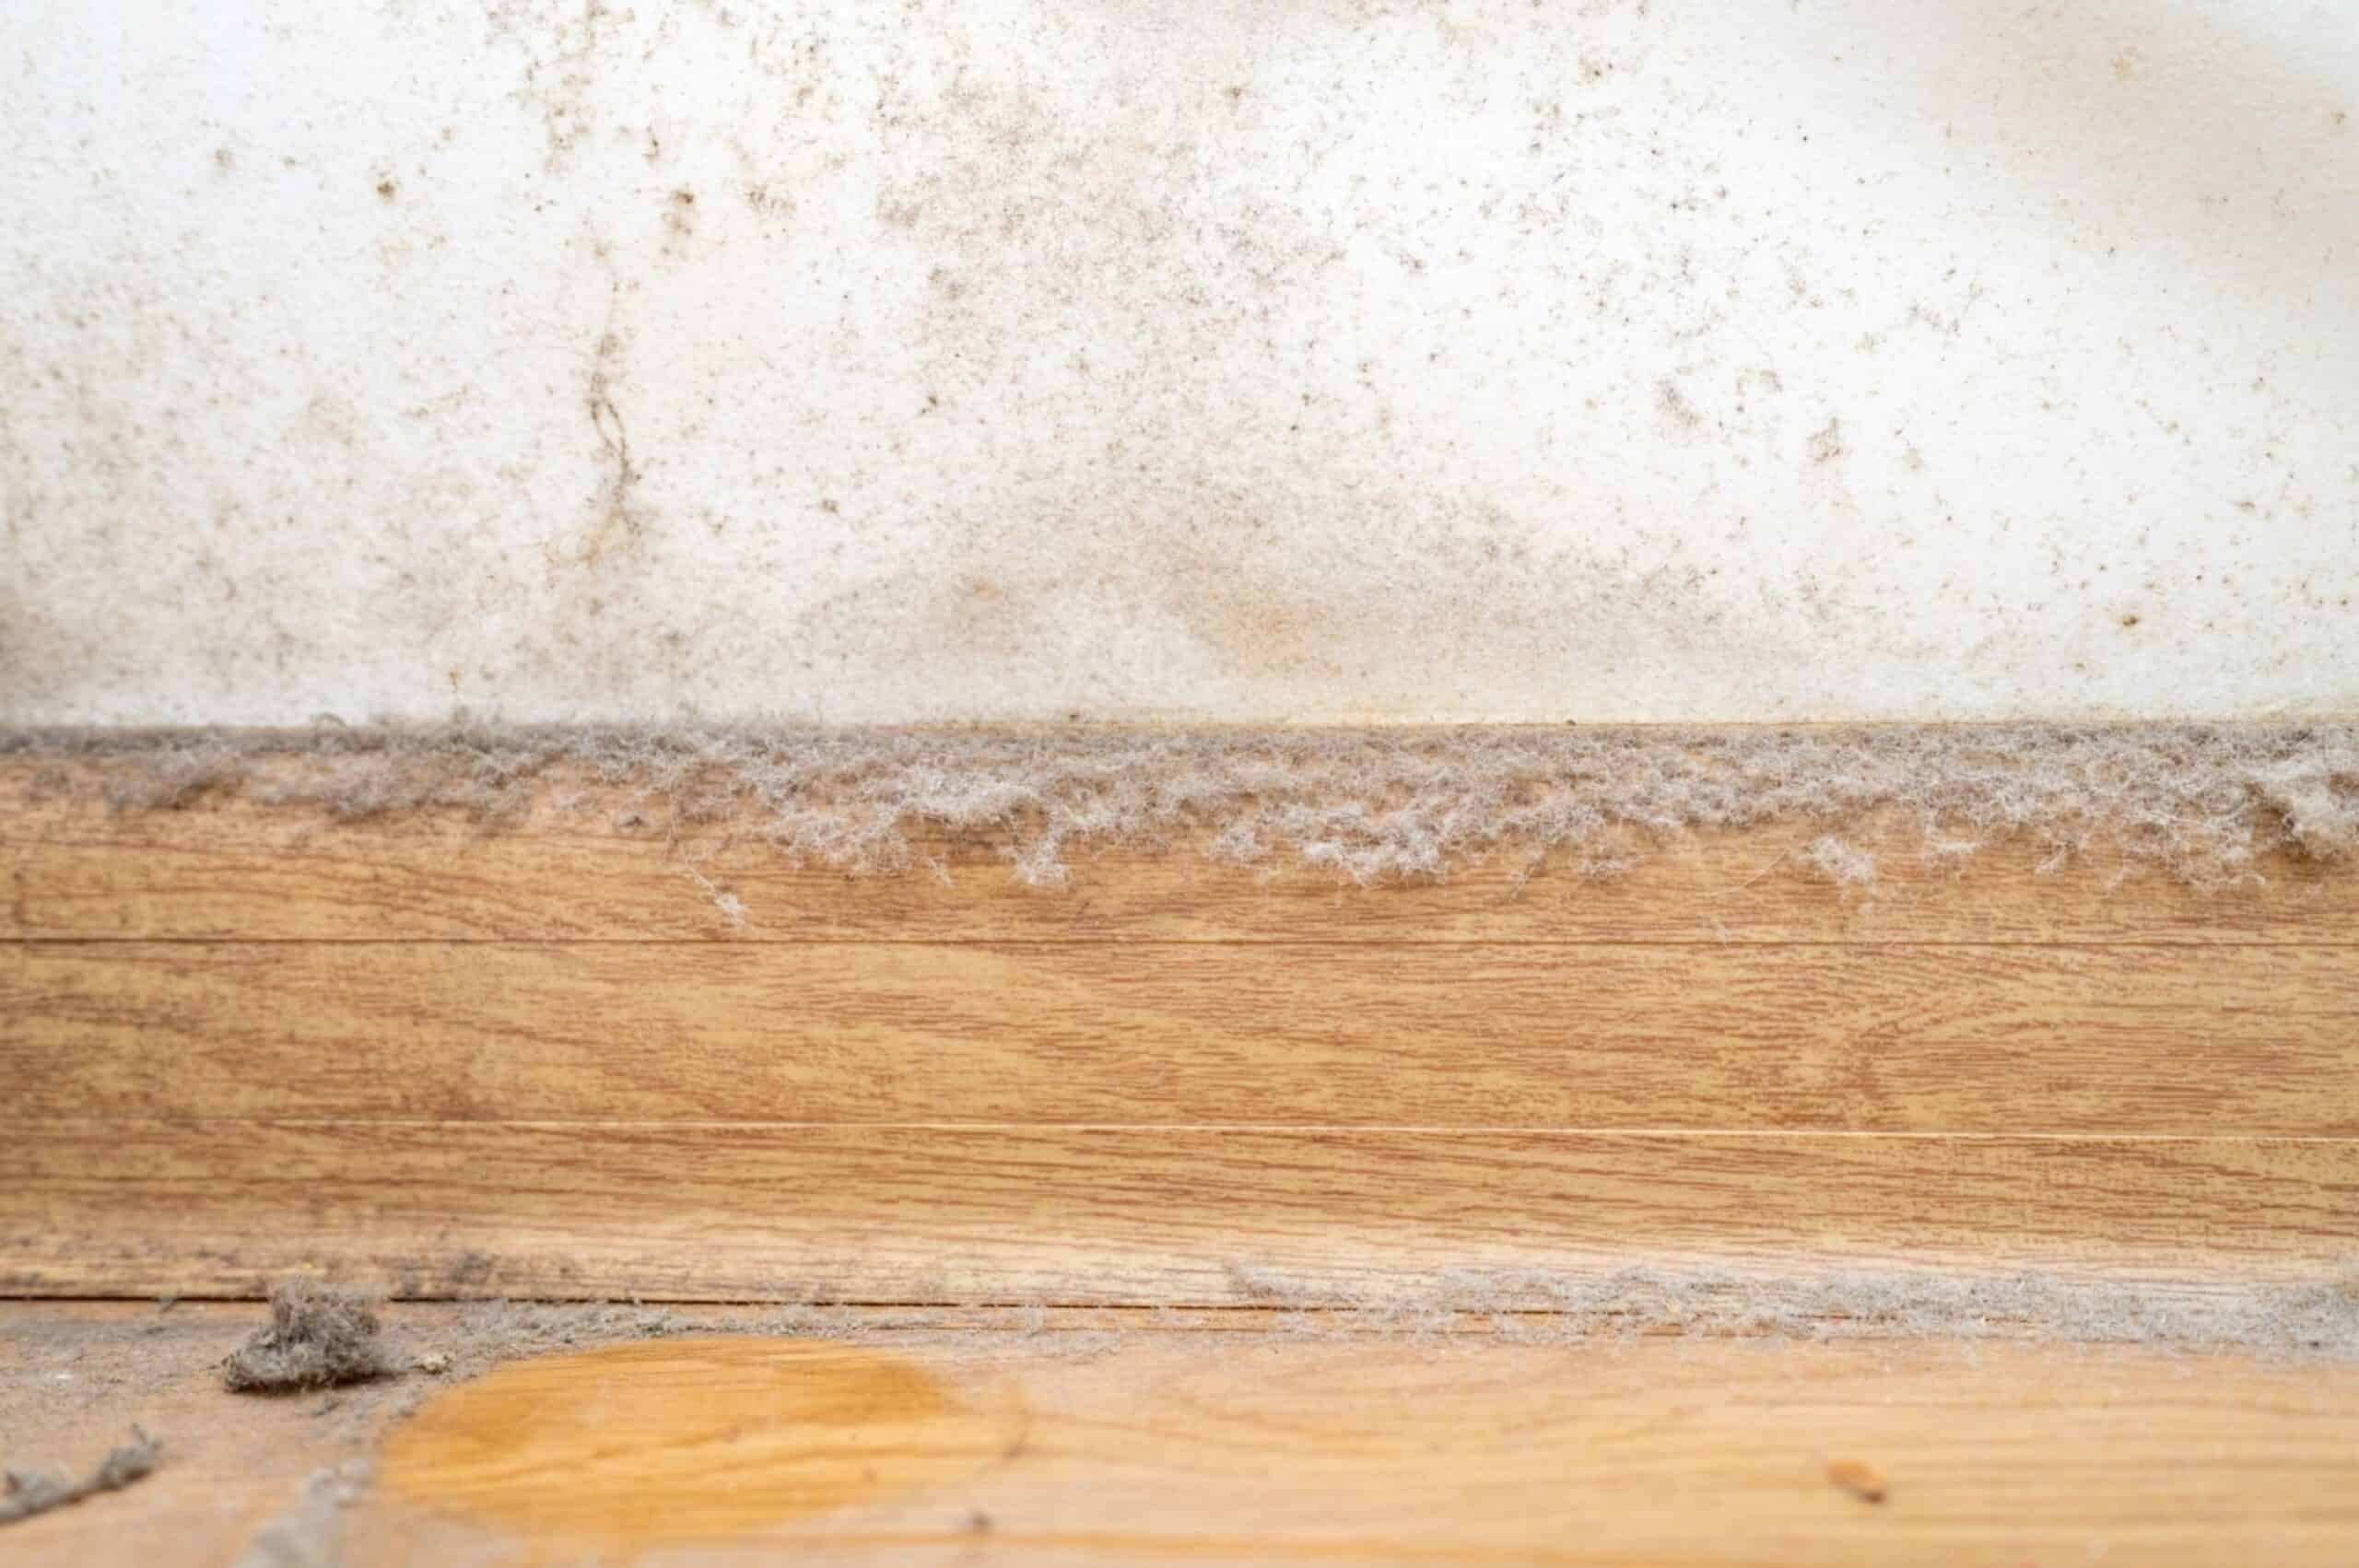 Layers of dust on the baseboards